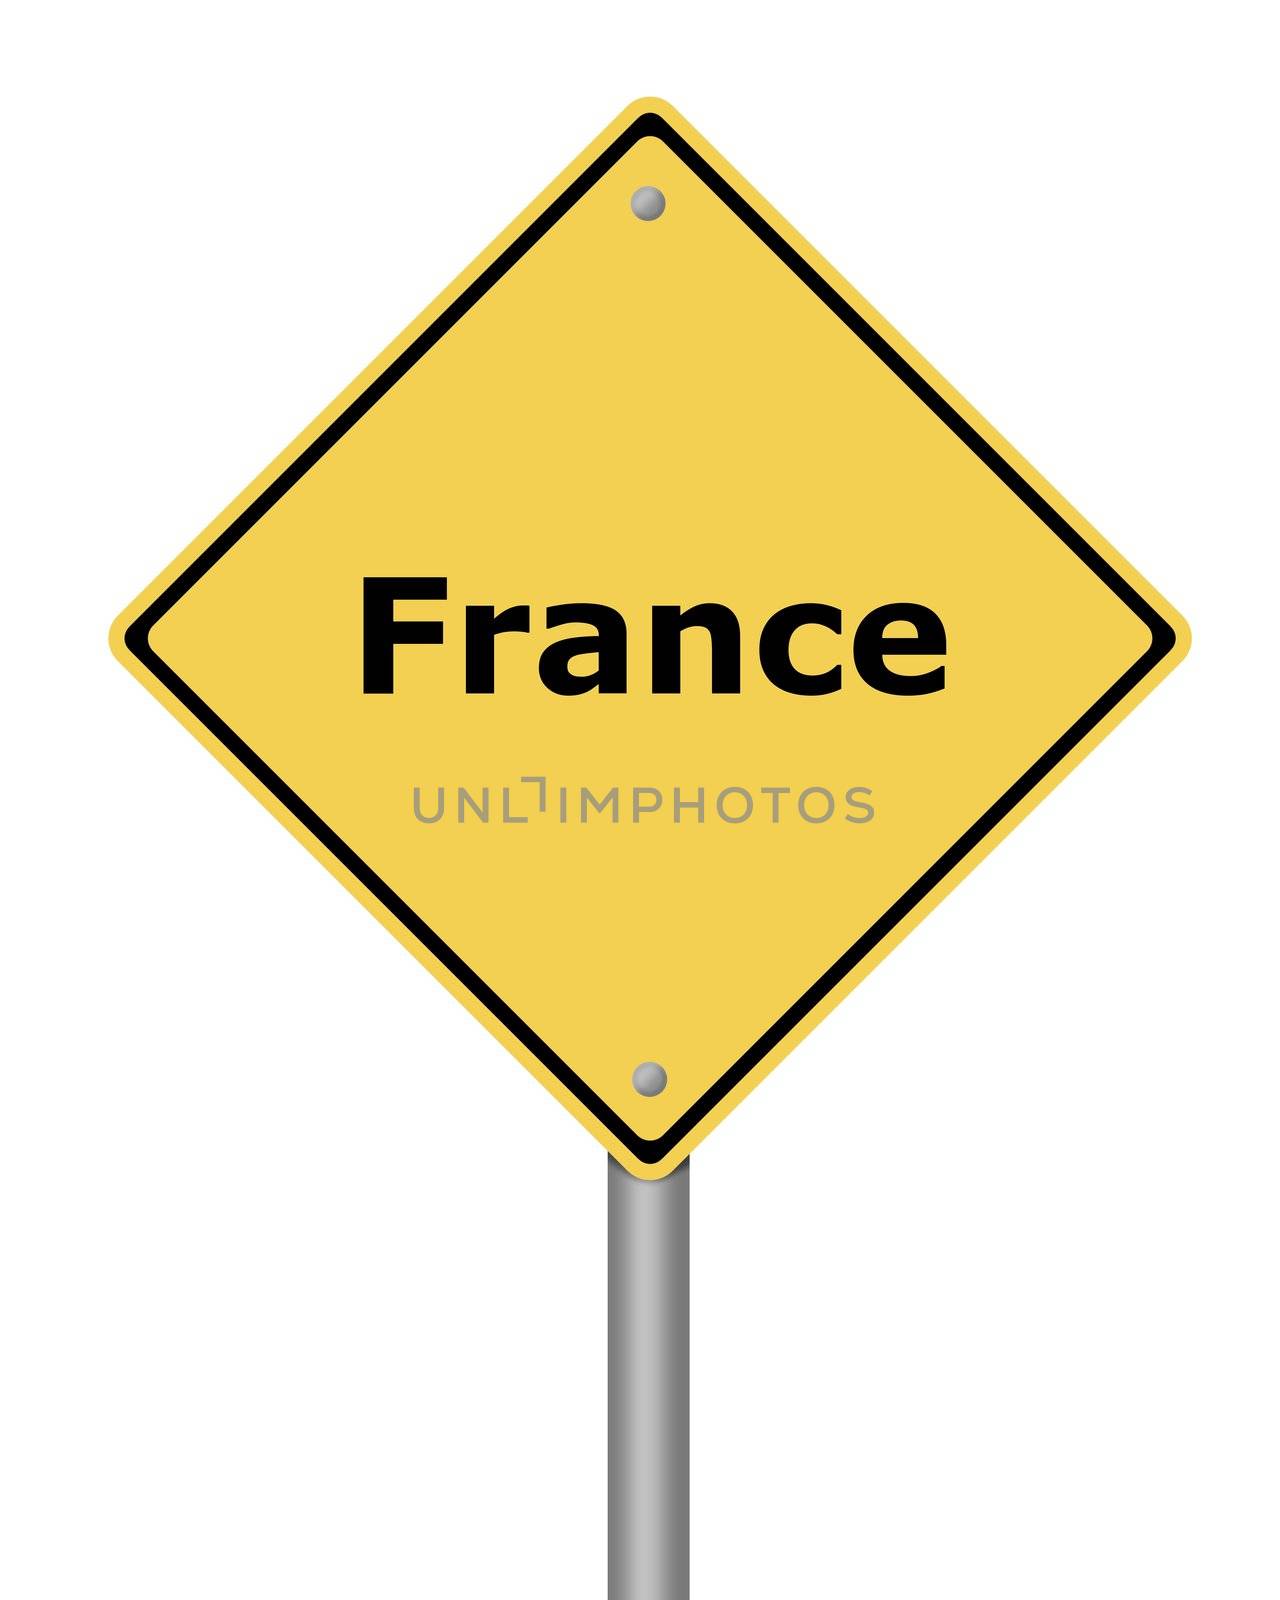 Yellow warning sign on white background with the text France